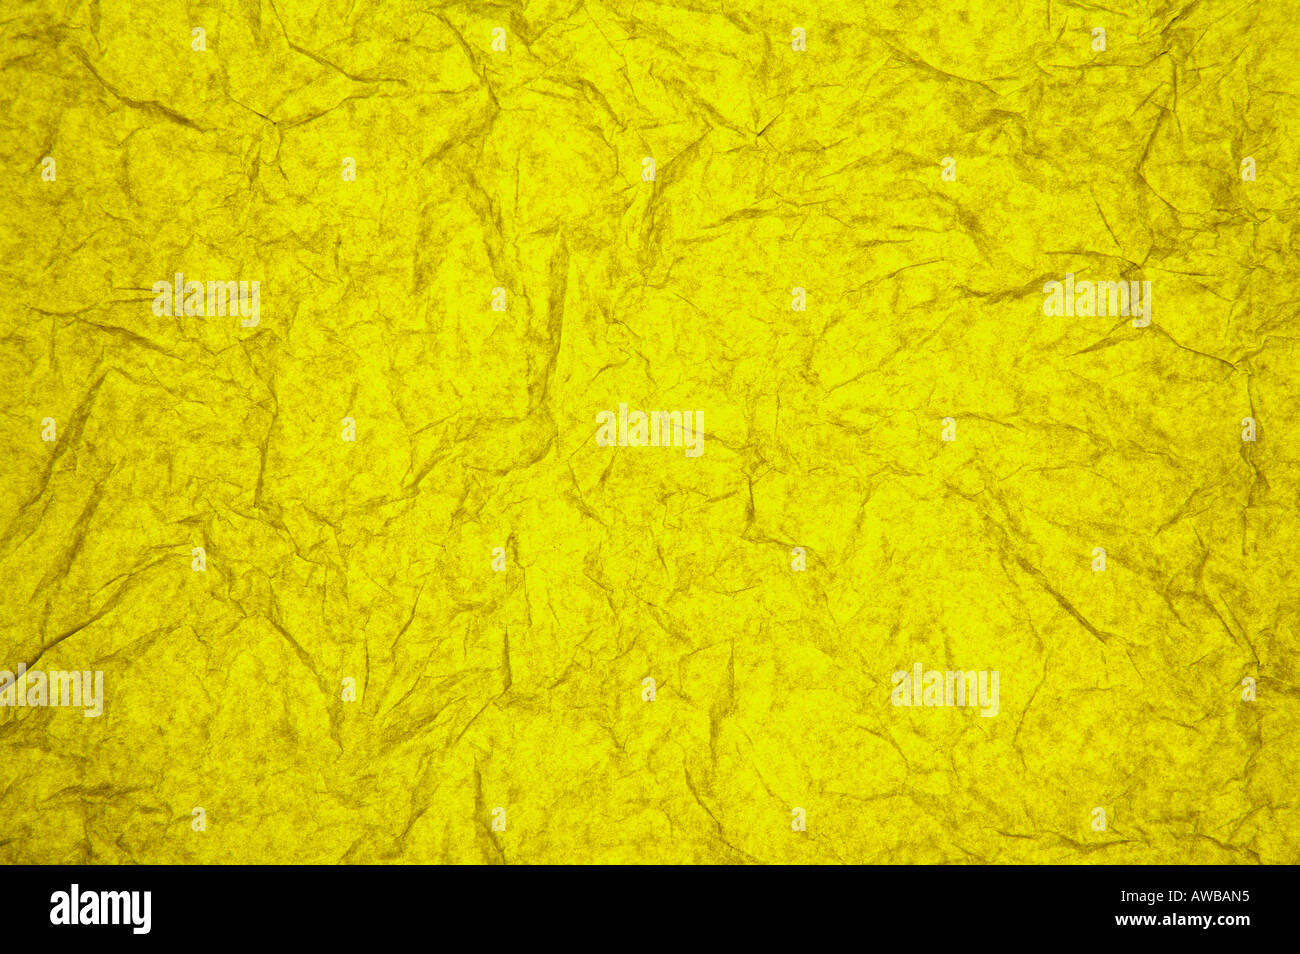 ABSTRACT RANDOM BACKGROUND OF CREASED CRUMPLED YELLOW TISSUE PAPER Stock Photo